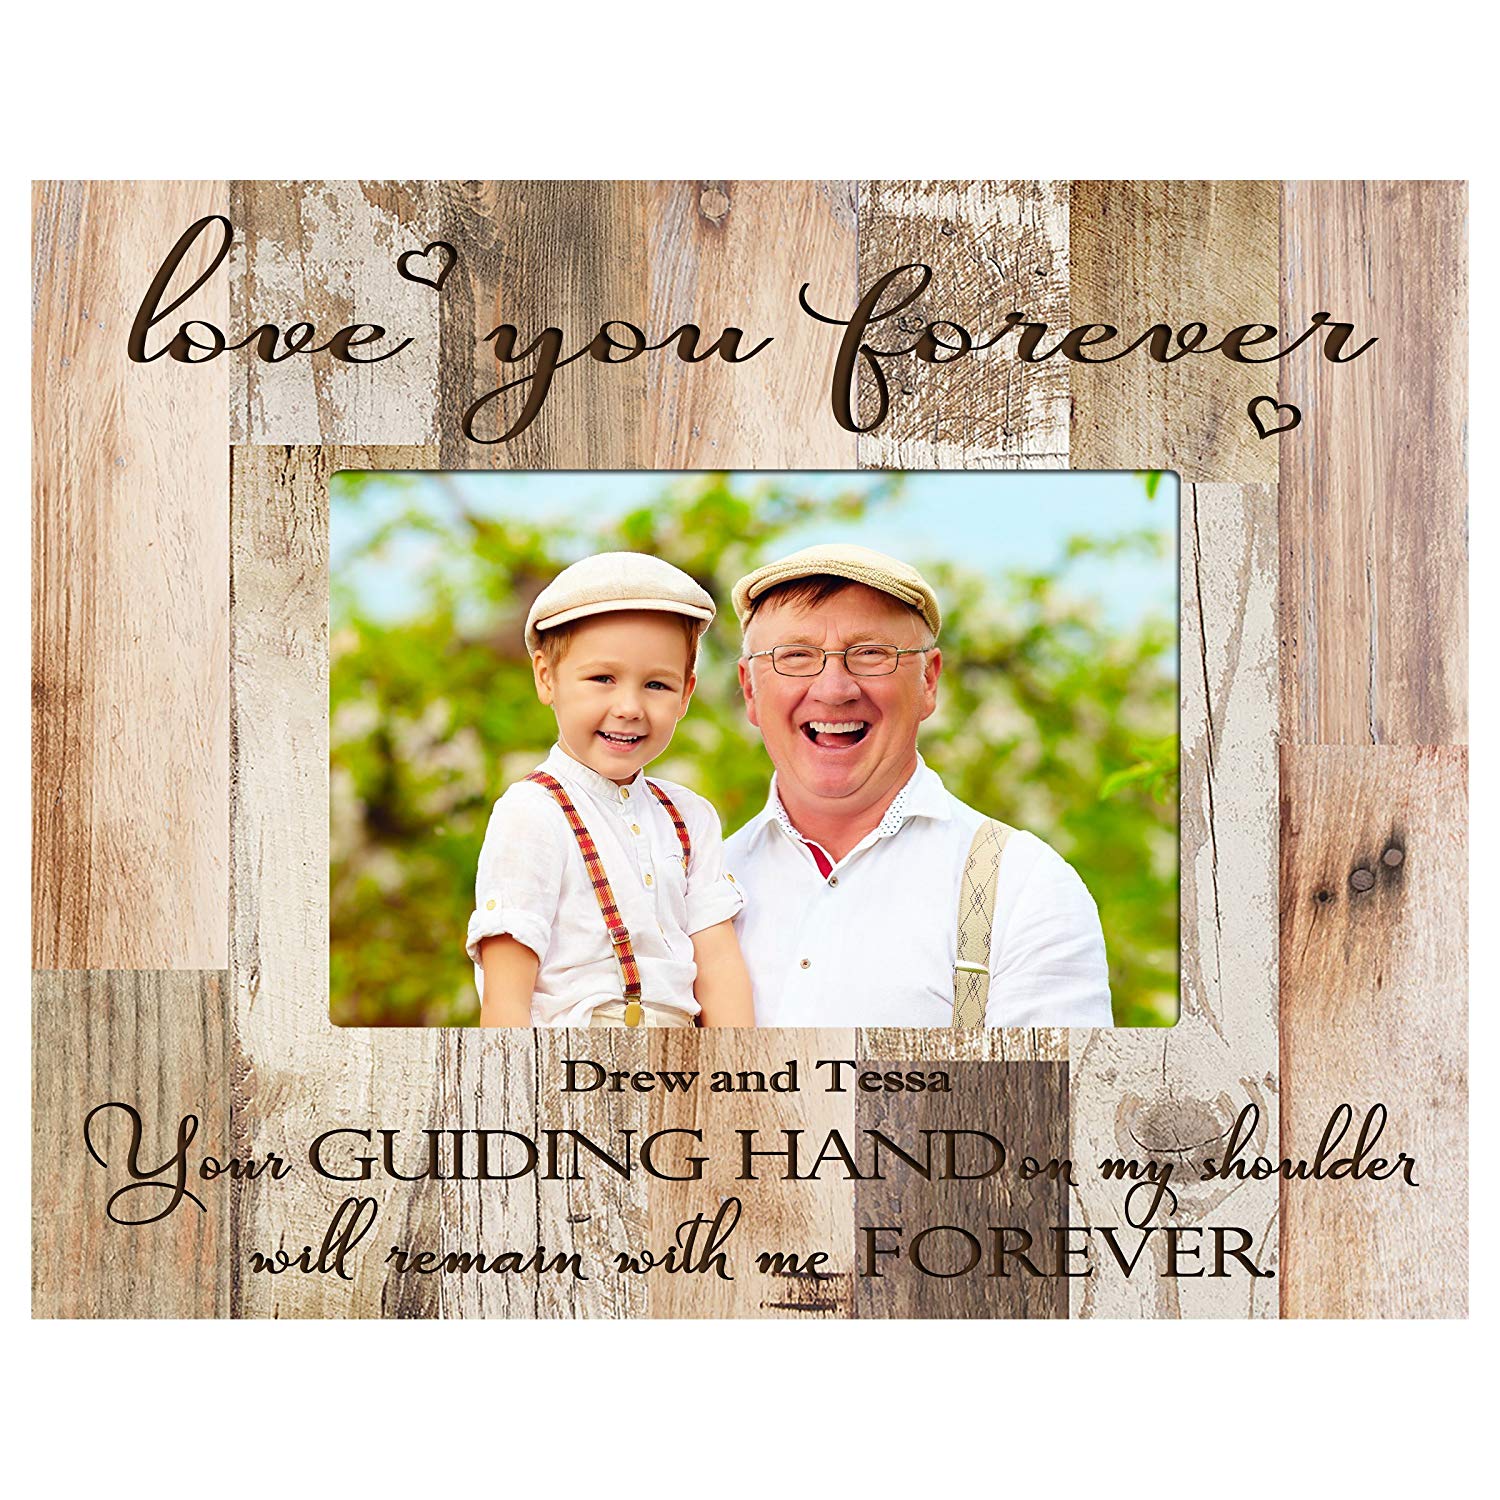 Personalized Engraved Birthday Picture Frame Gift for Dad - Guiding Hand - LifeSong Milestones